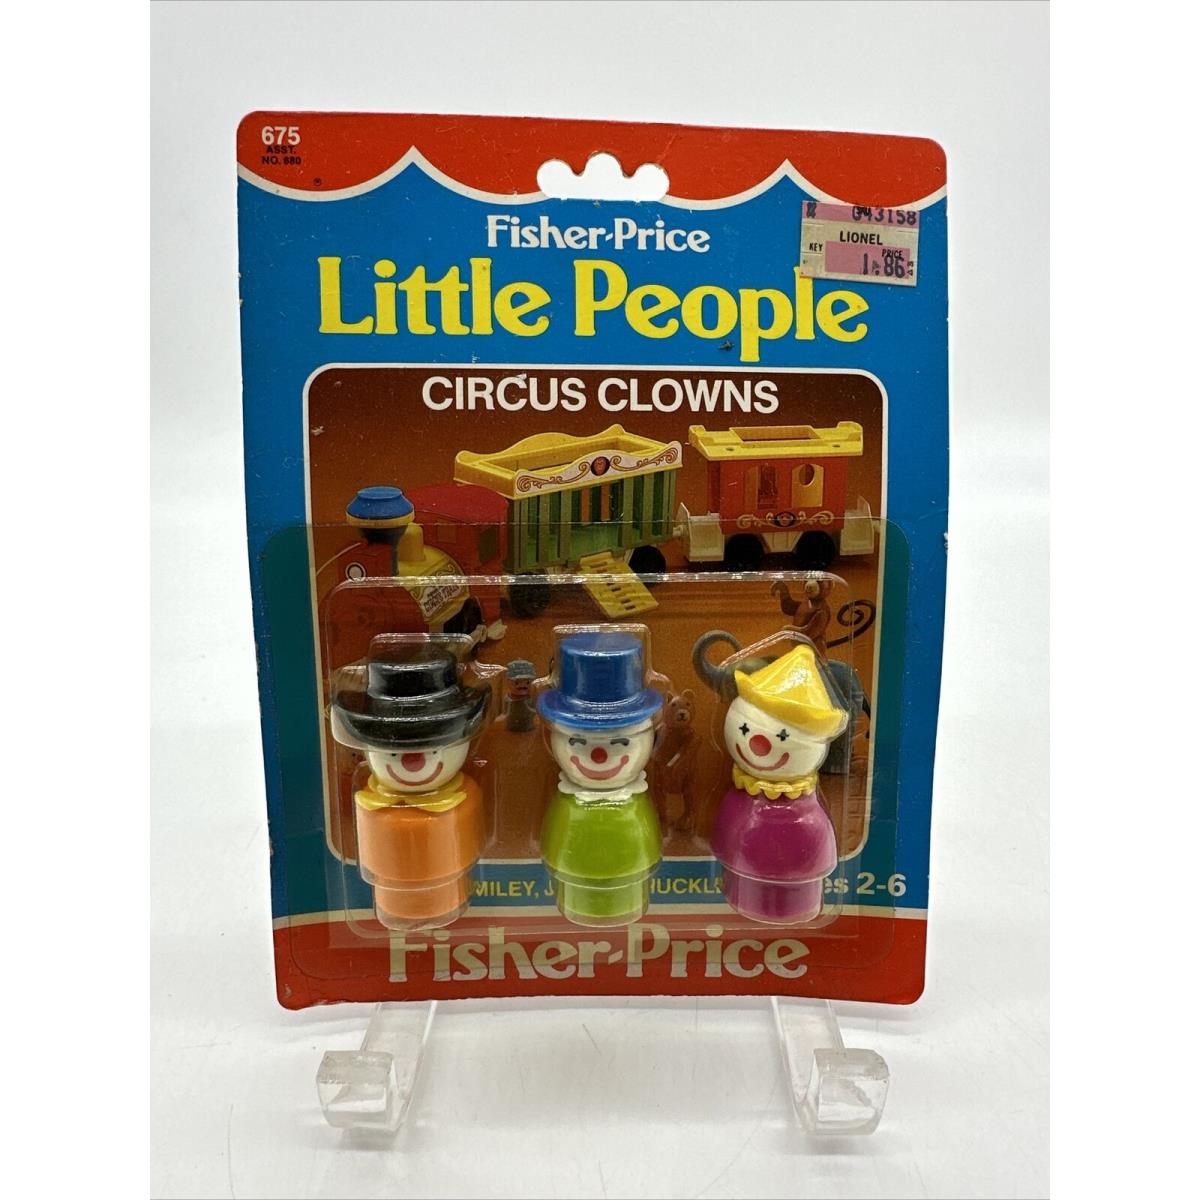 Vintage 1983 Fisher Price Little People Circus Clowns 675 Nos Figures Toy